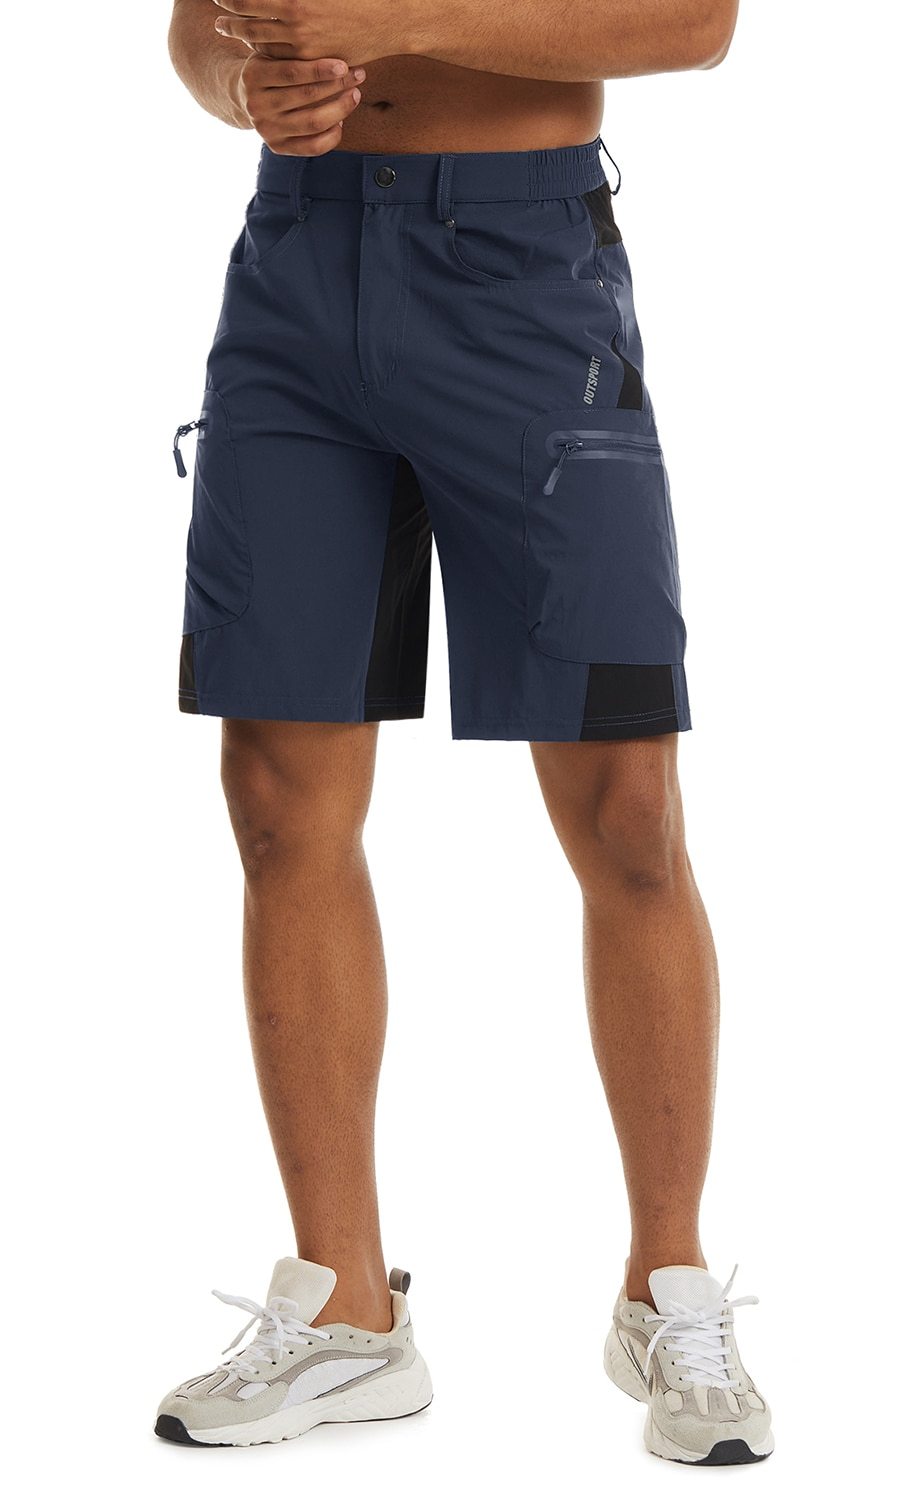 Men's lightweight hiking shorts with multiple zip up pockets.